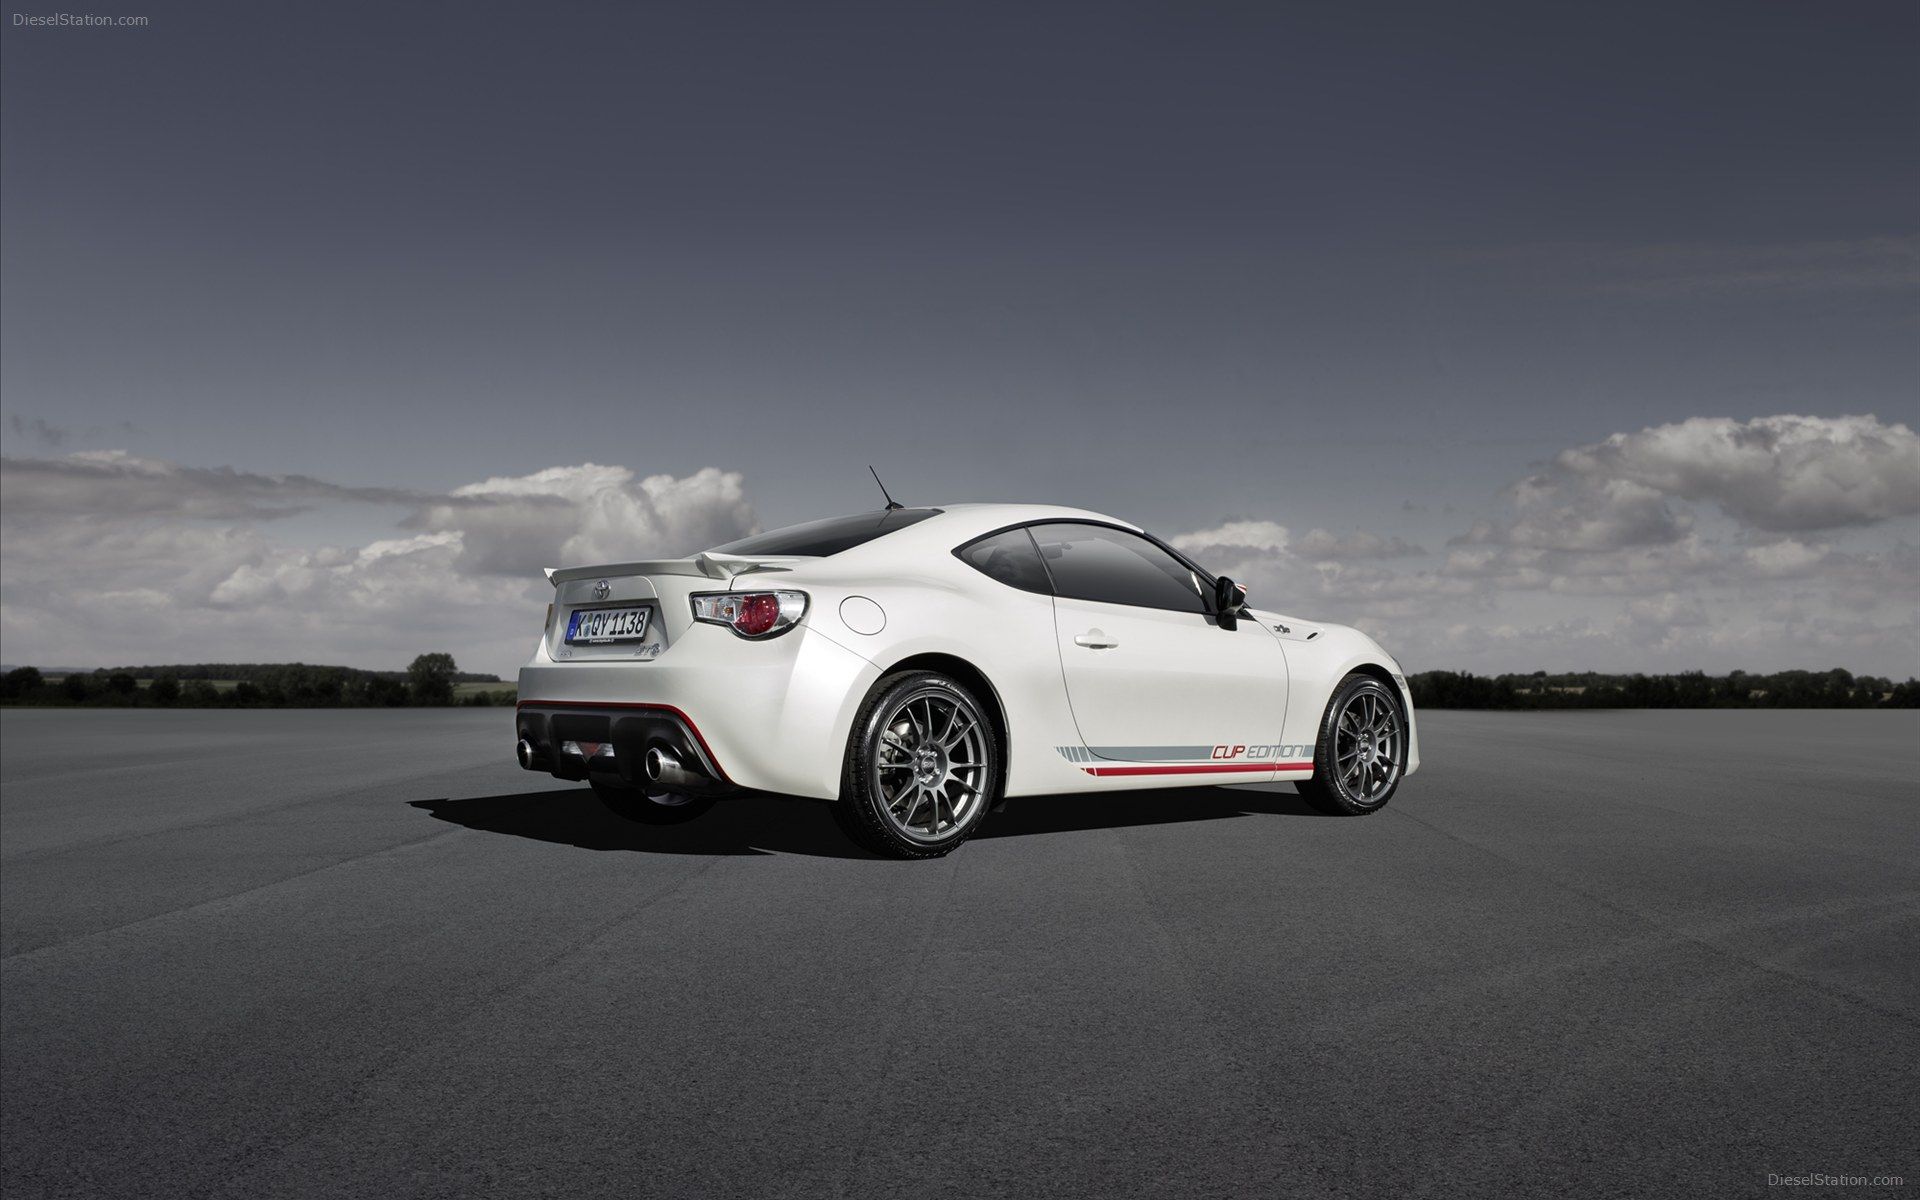 Toyota GT86 Cup Edition 2013 Widescreen Exotic Car Image #10 of 30 ...